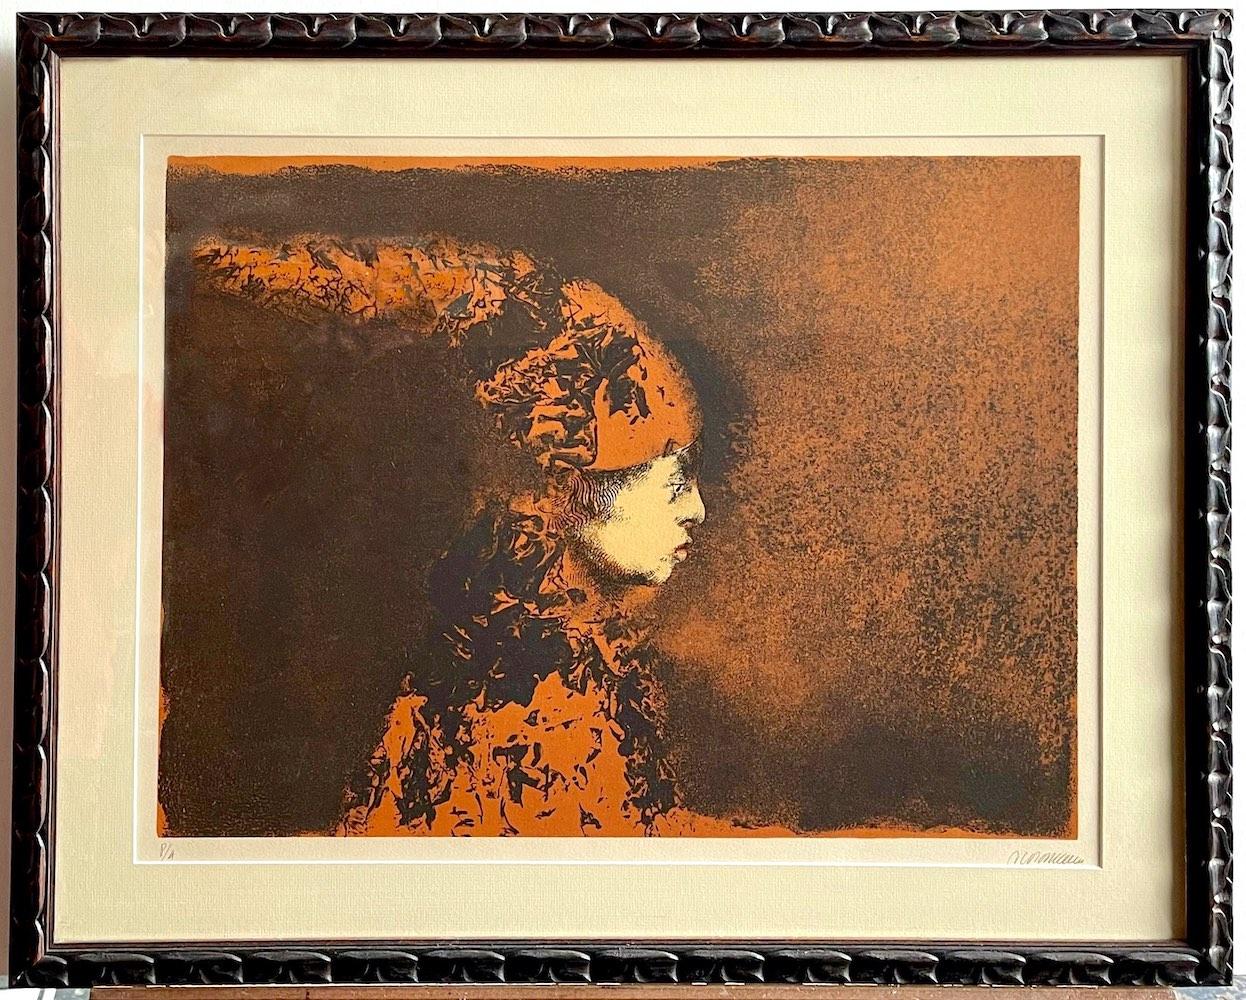 Niño Payaso is an original hand drawn stone lithograph by the Mexican artist Rafael Coronel. Niño Payaso was printed one color at a time on archival printmaking paper using traditional hand lithography techniques in Paris c.1973 from lithographic